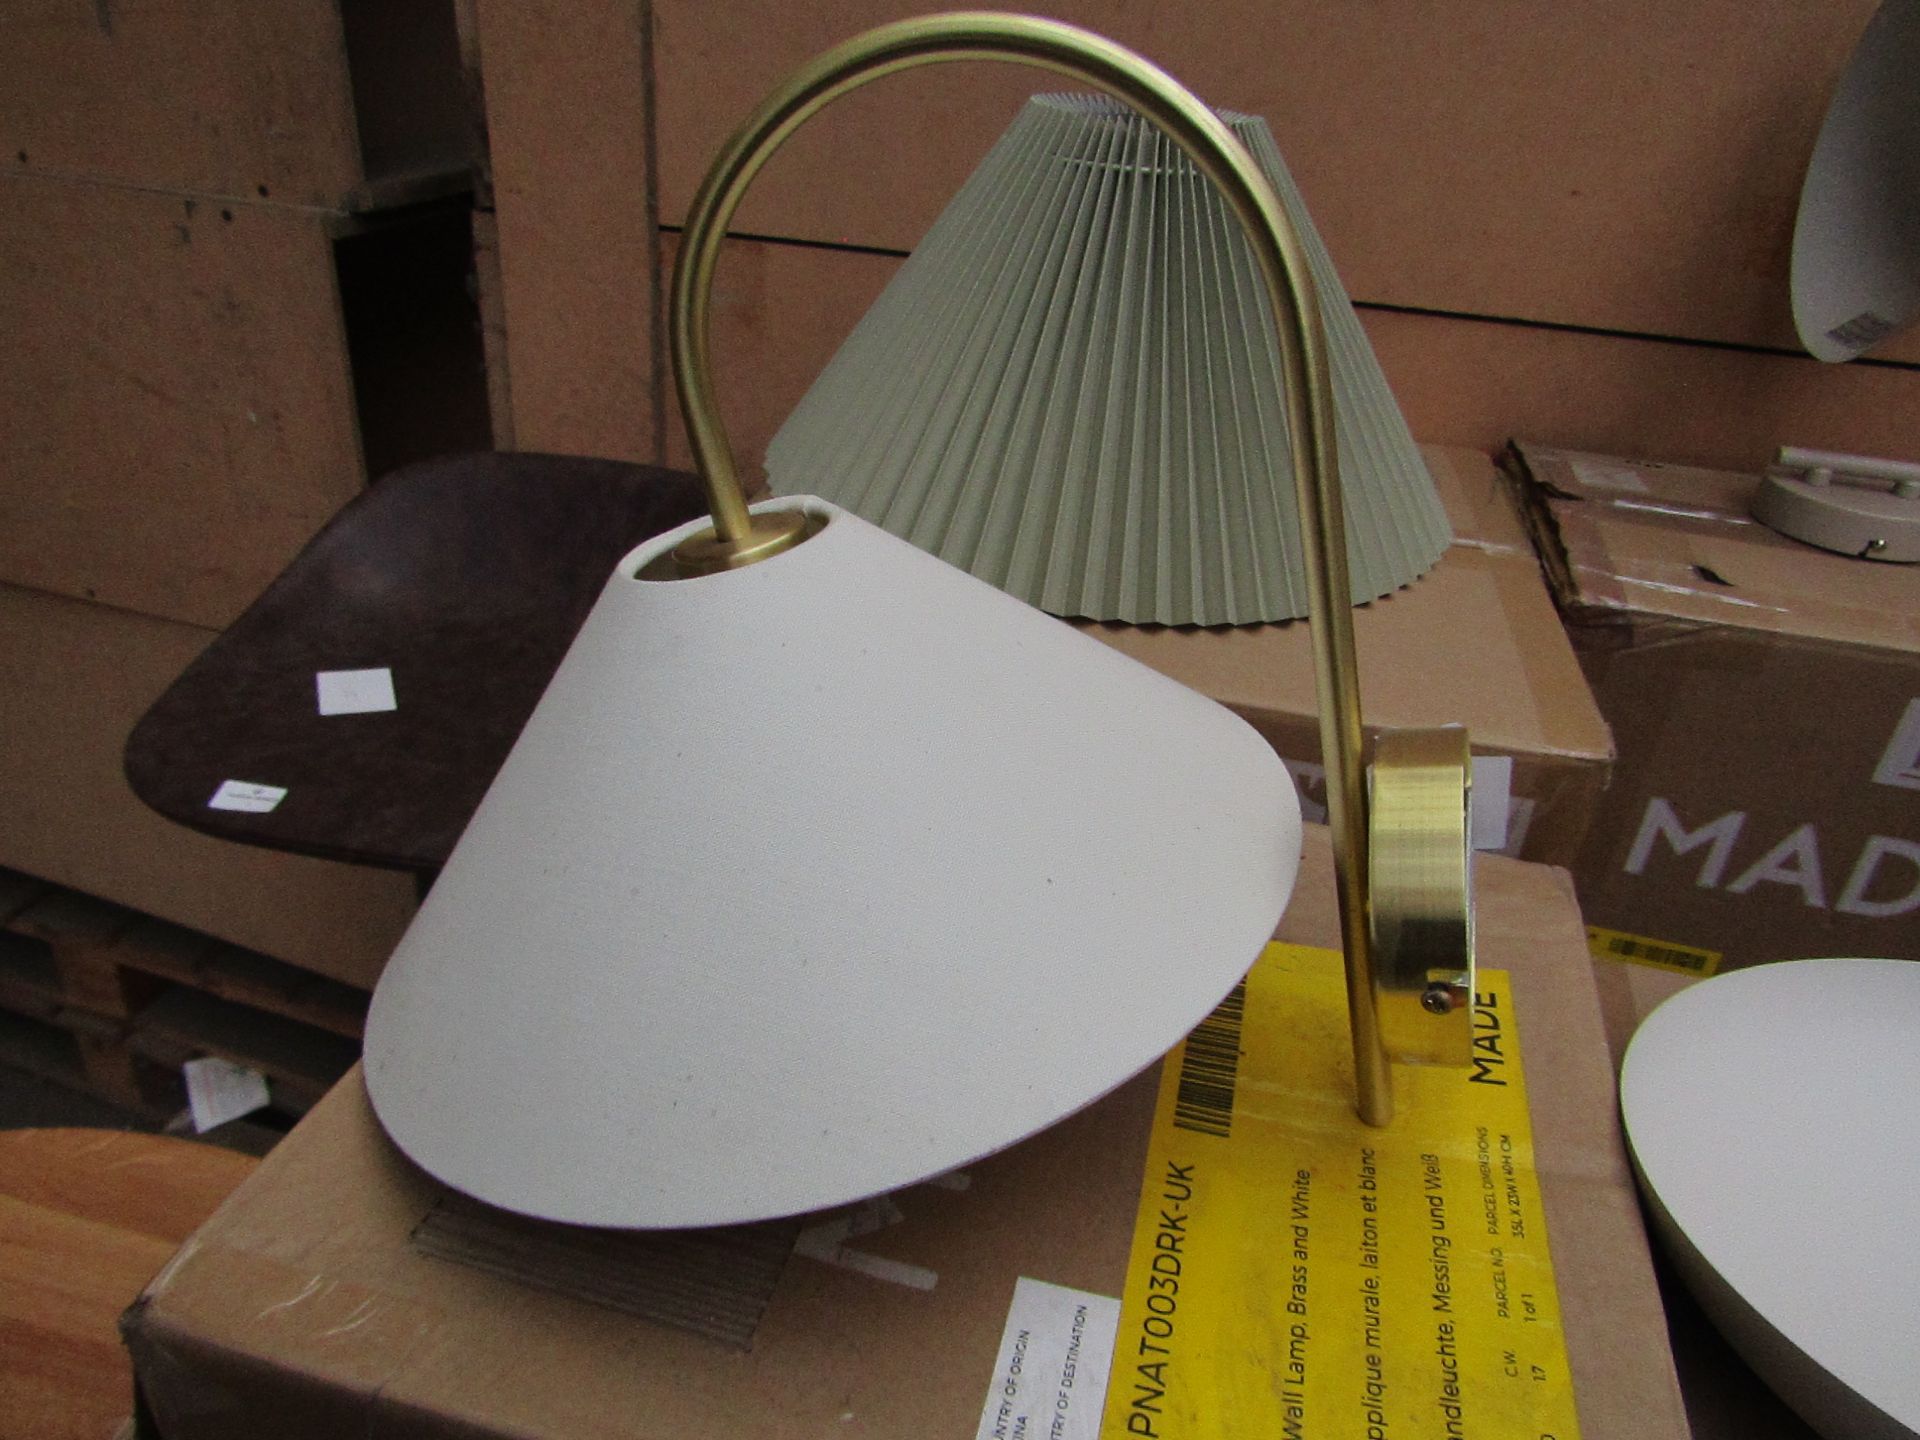 1 x Made.com Natalie Wall Lamp Brass and White RRP £55 SKU MAD-WLPNAT003DRK-UK TOTAL RRP £55 This